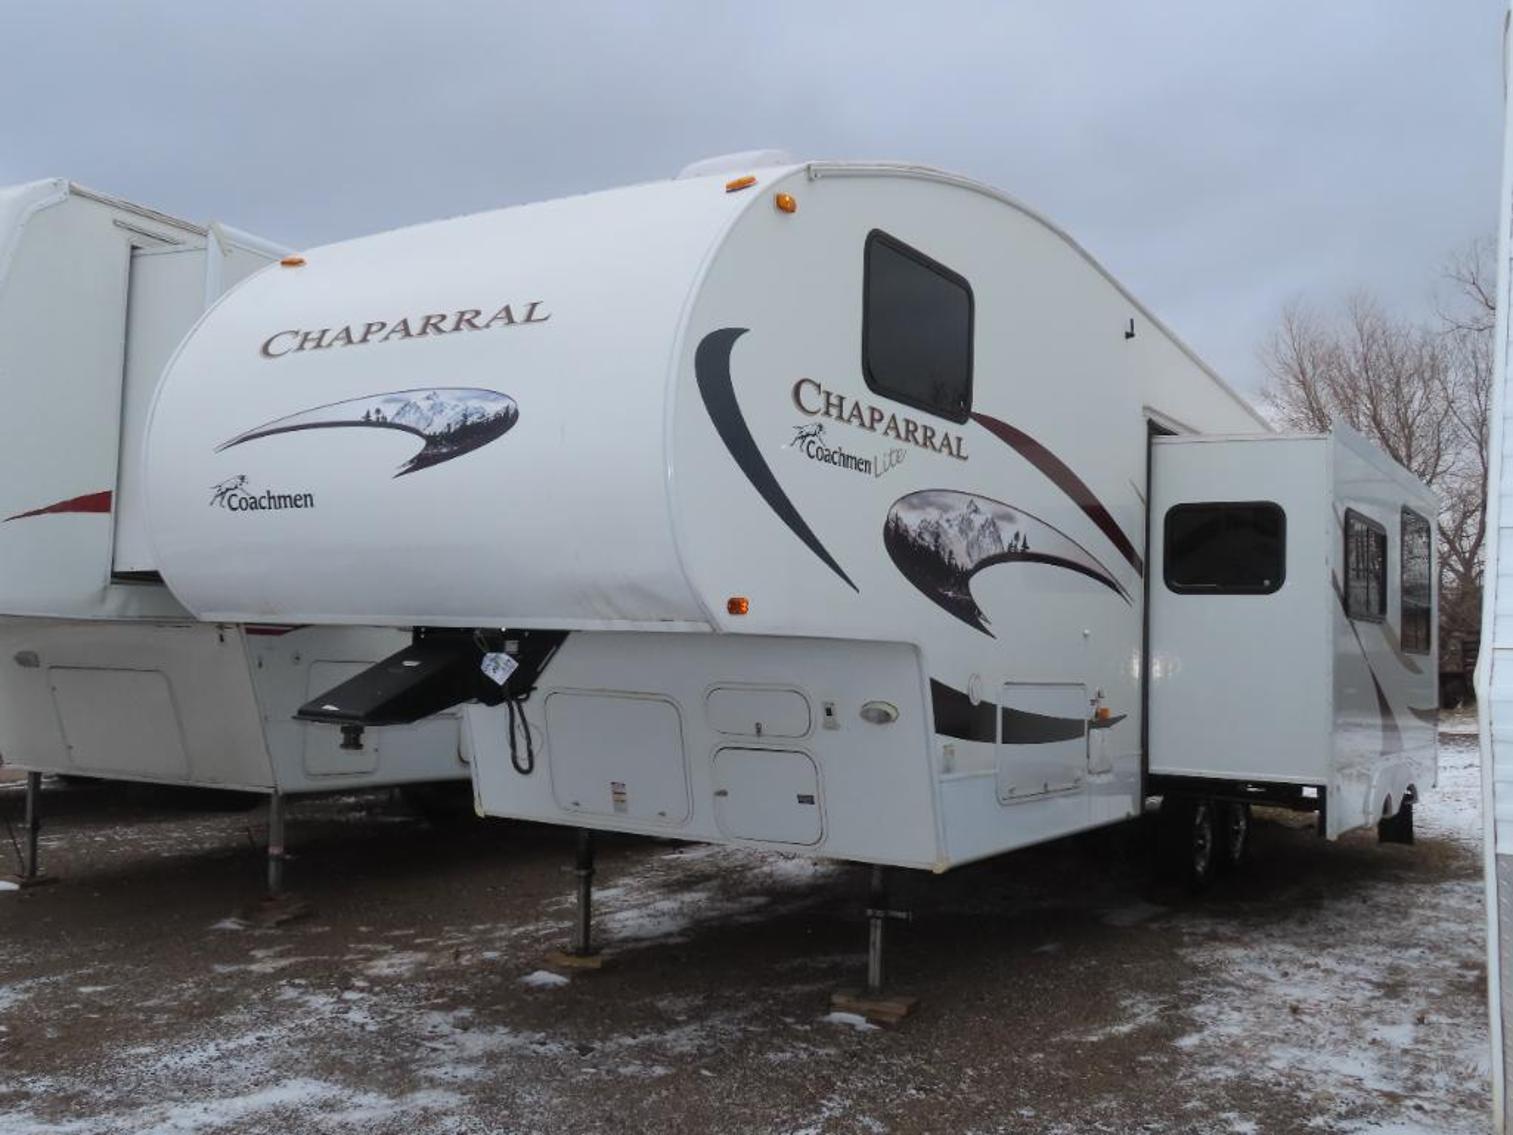 30 Units: (8) 5th Wheels and (22) Travel Trailers